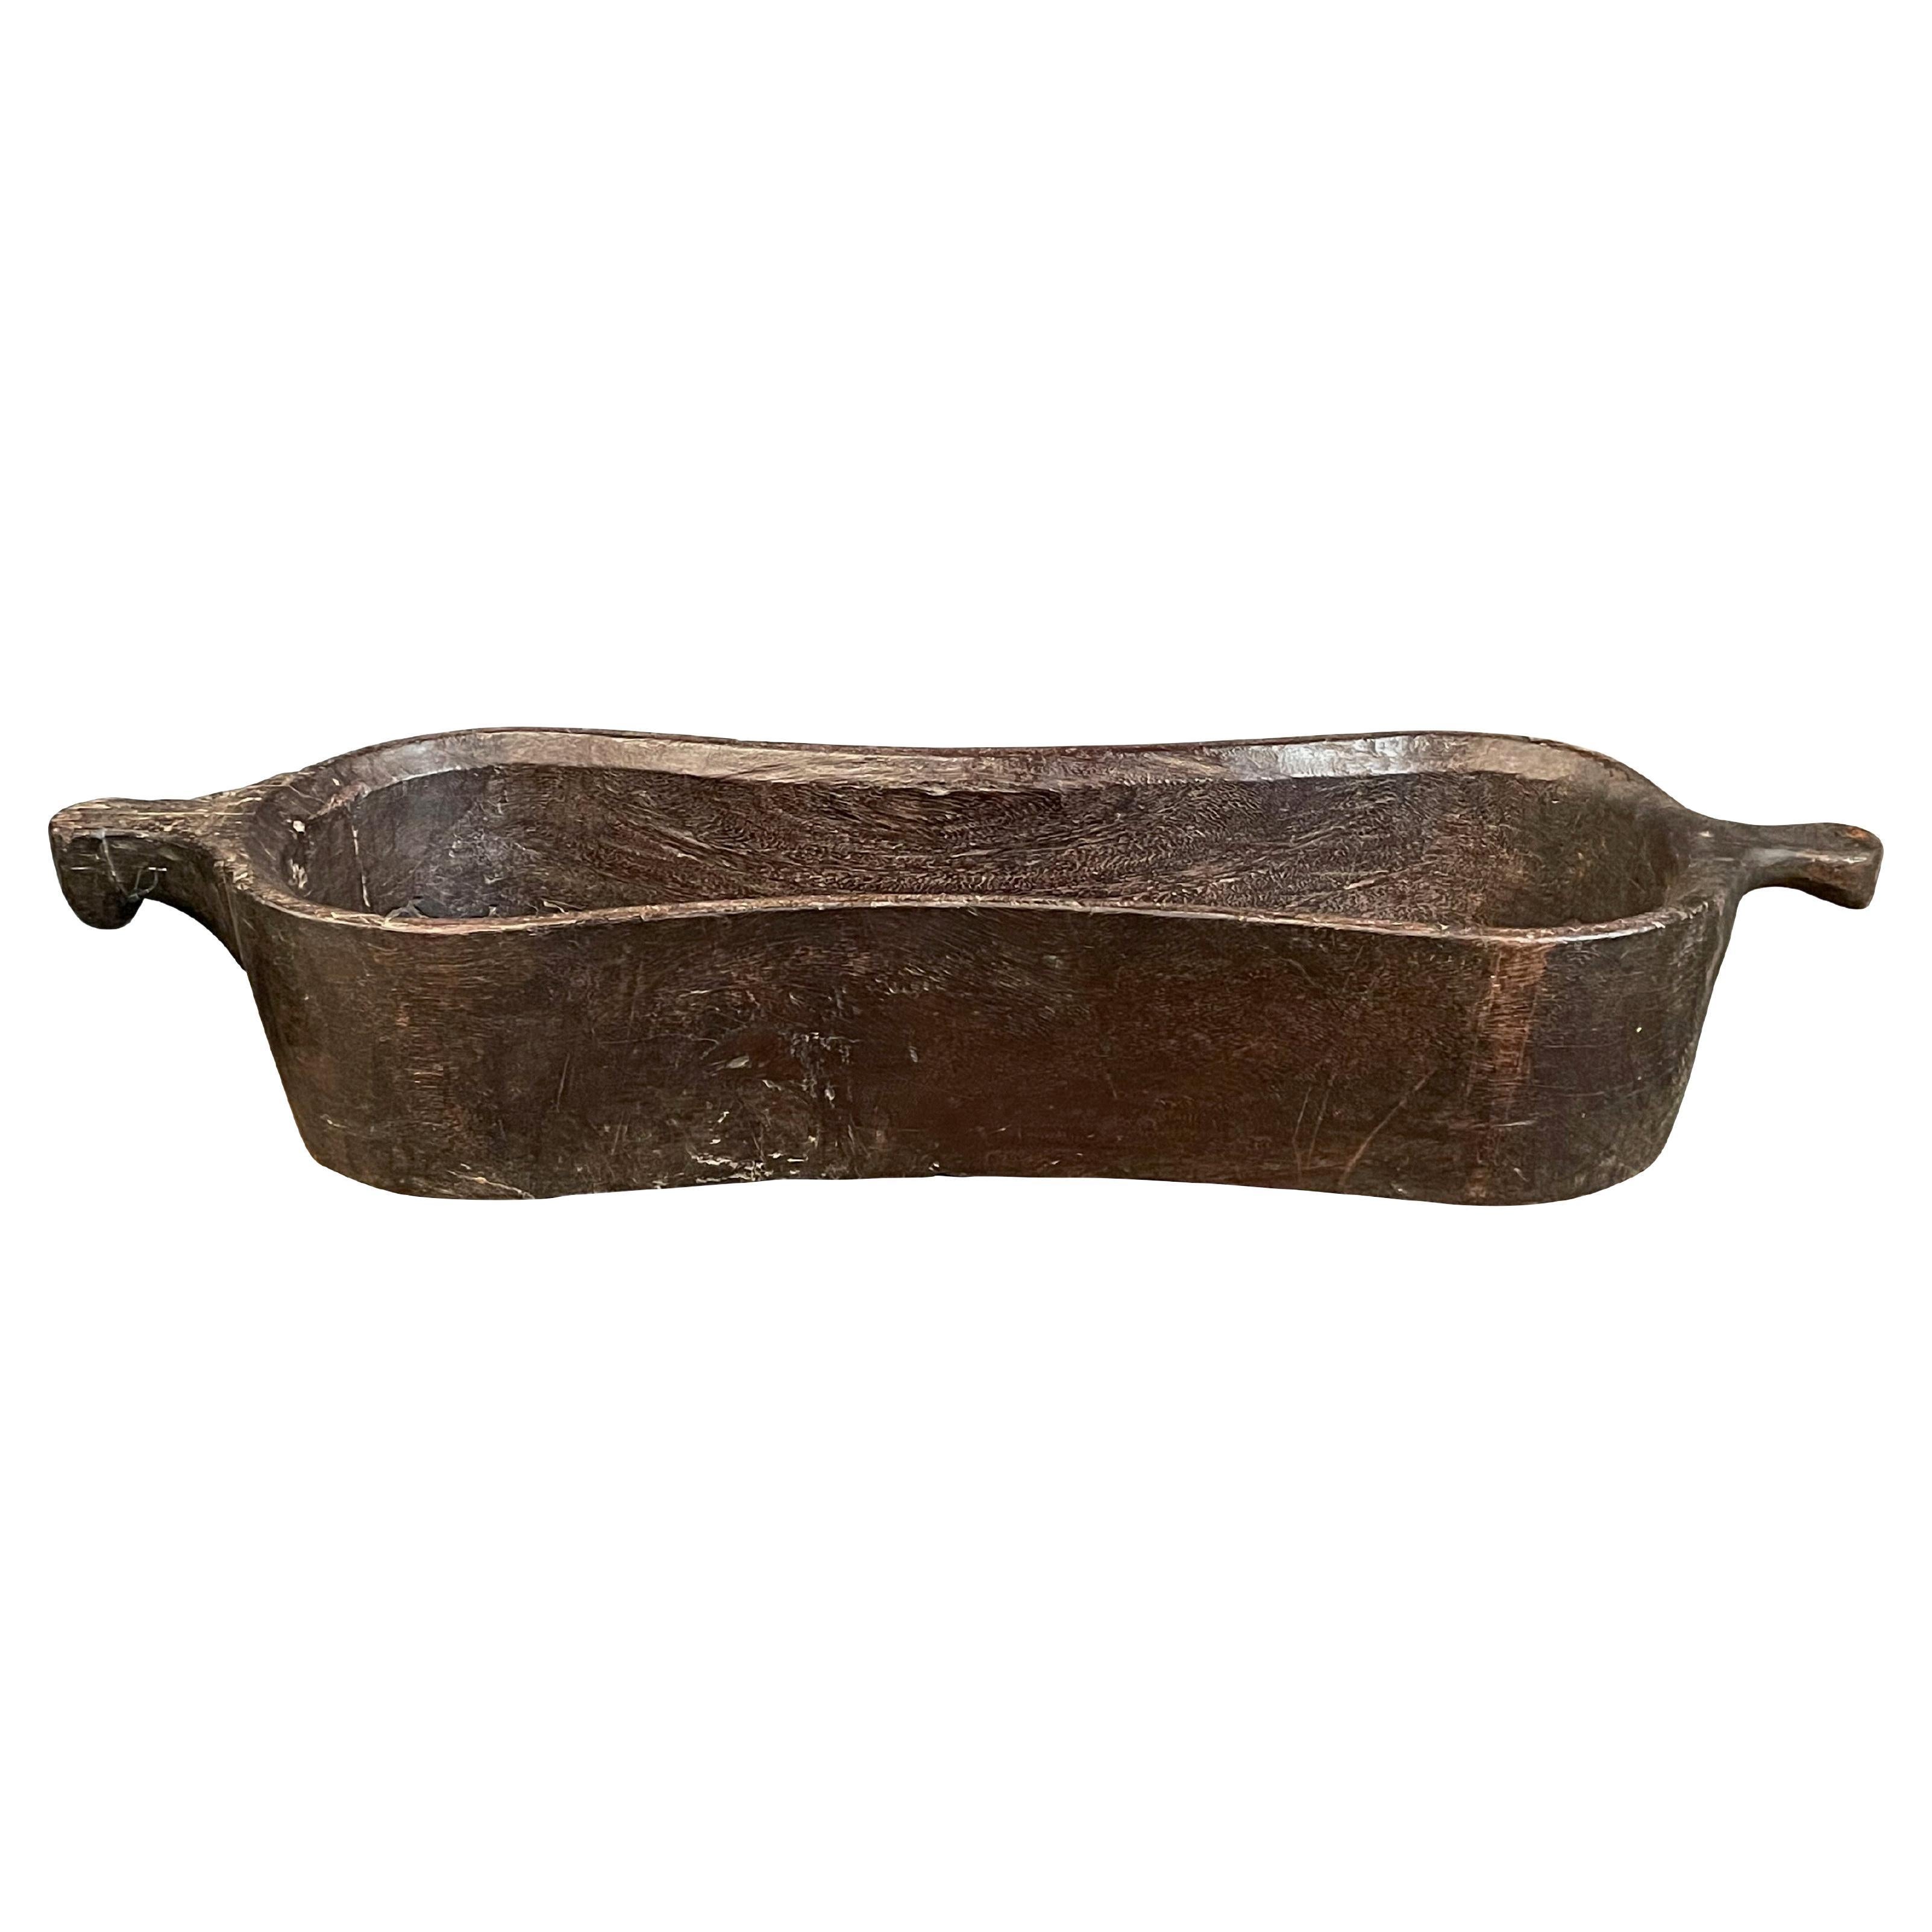 Wooden Carved Bowl With Handles, Indonesia, 19th Century